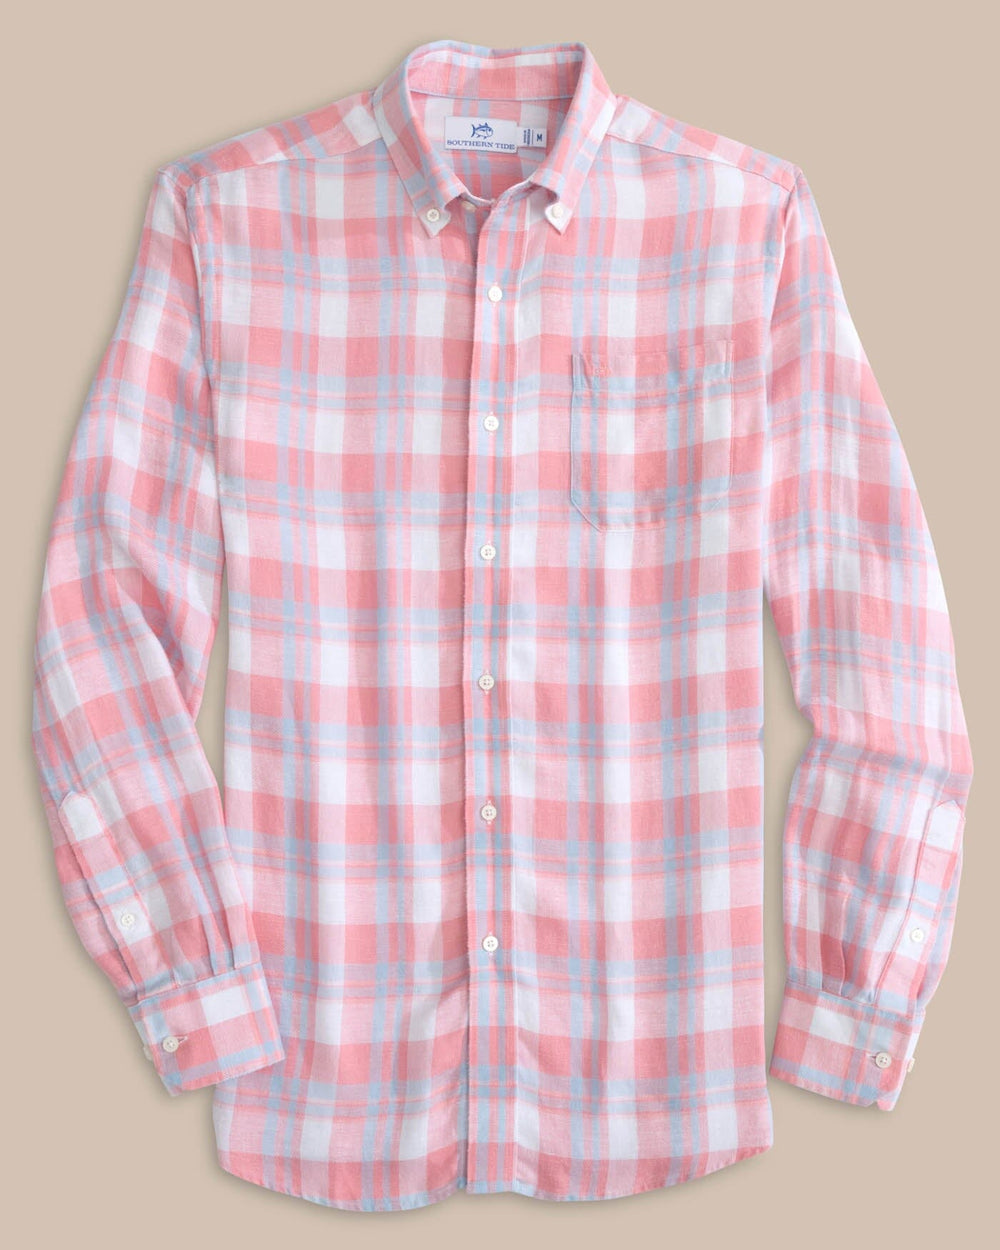 The front view of the Southern Tide Headland Reedy Plaid Long Sleeve Sport Shirt by Southern Tide - Geranium Pink